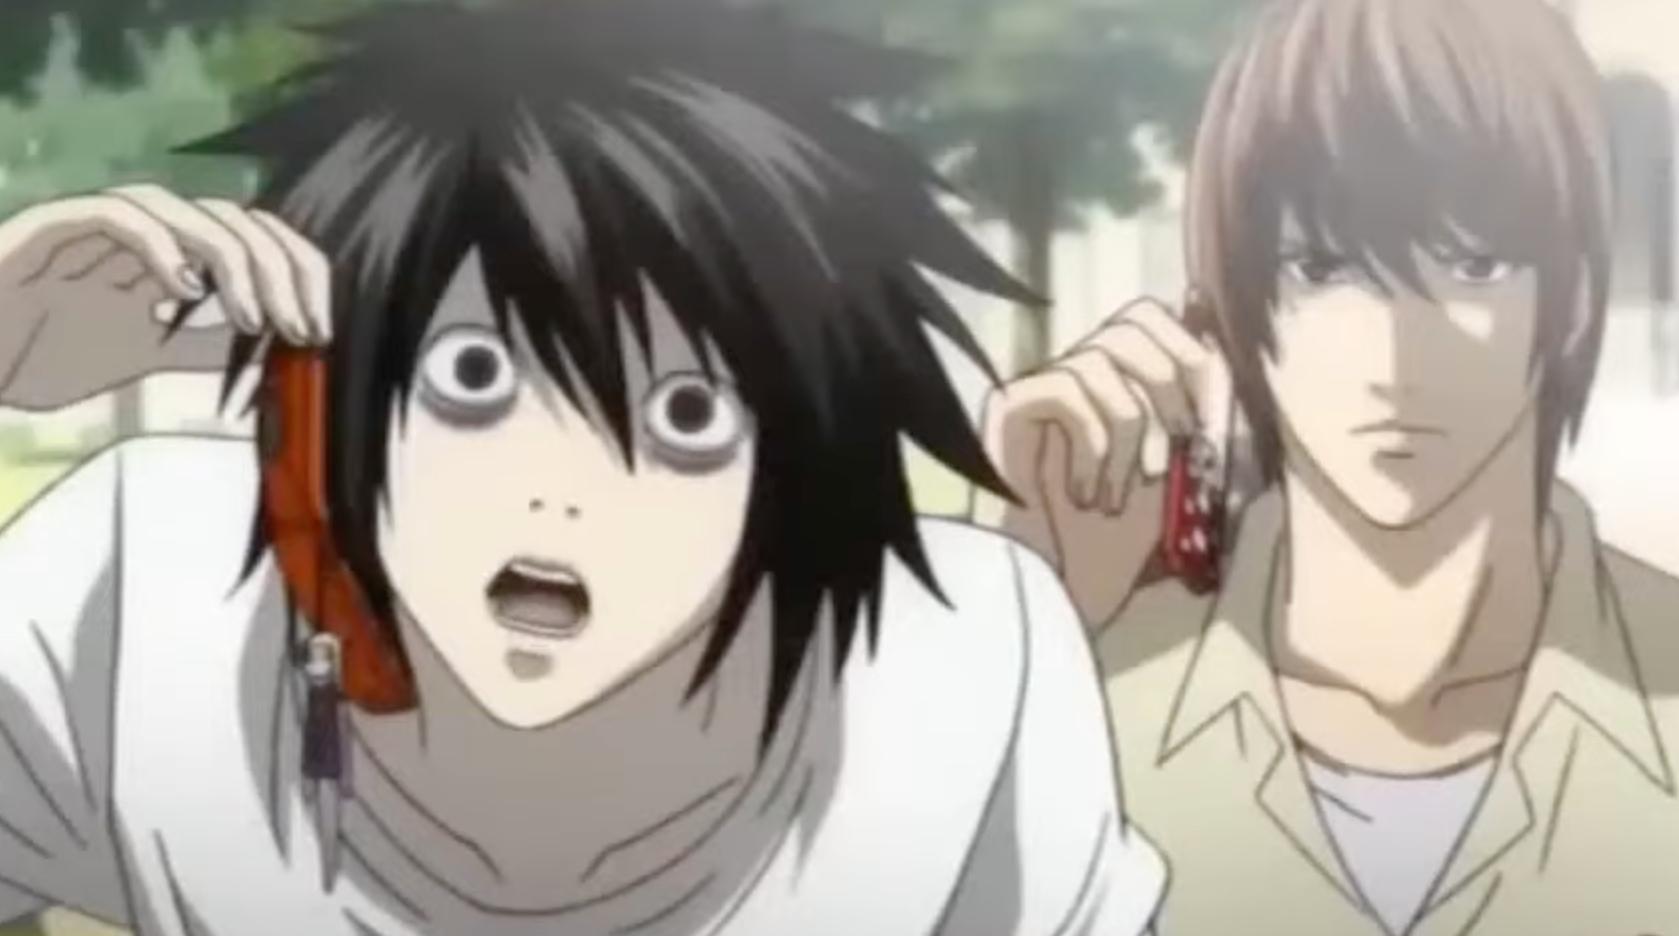 How to be the next L Lawliet from Death Note